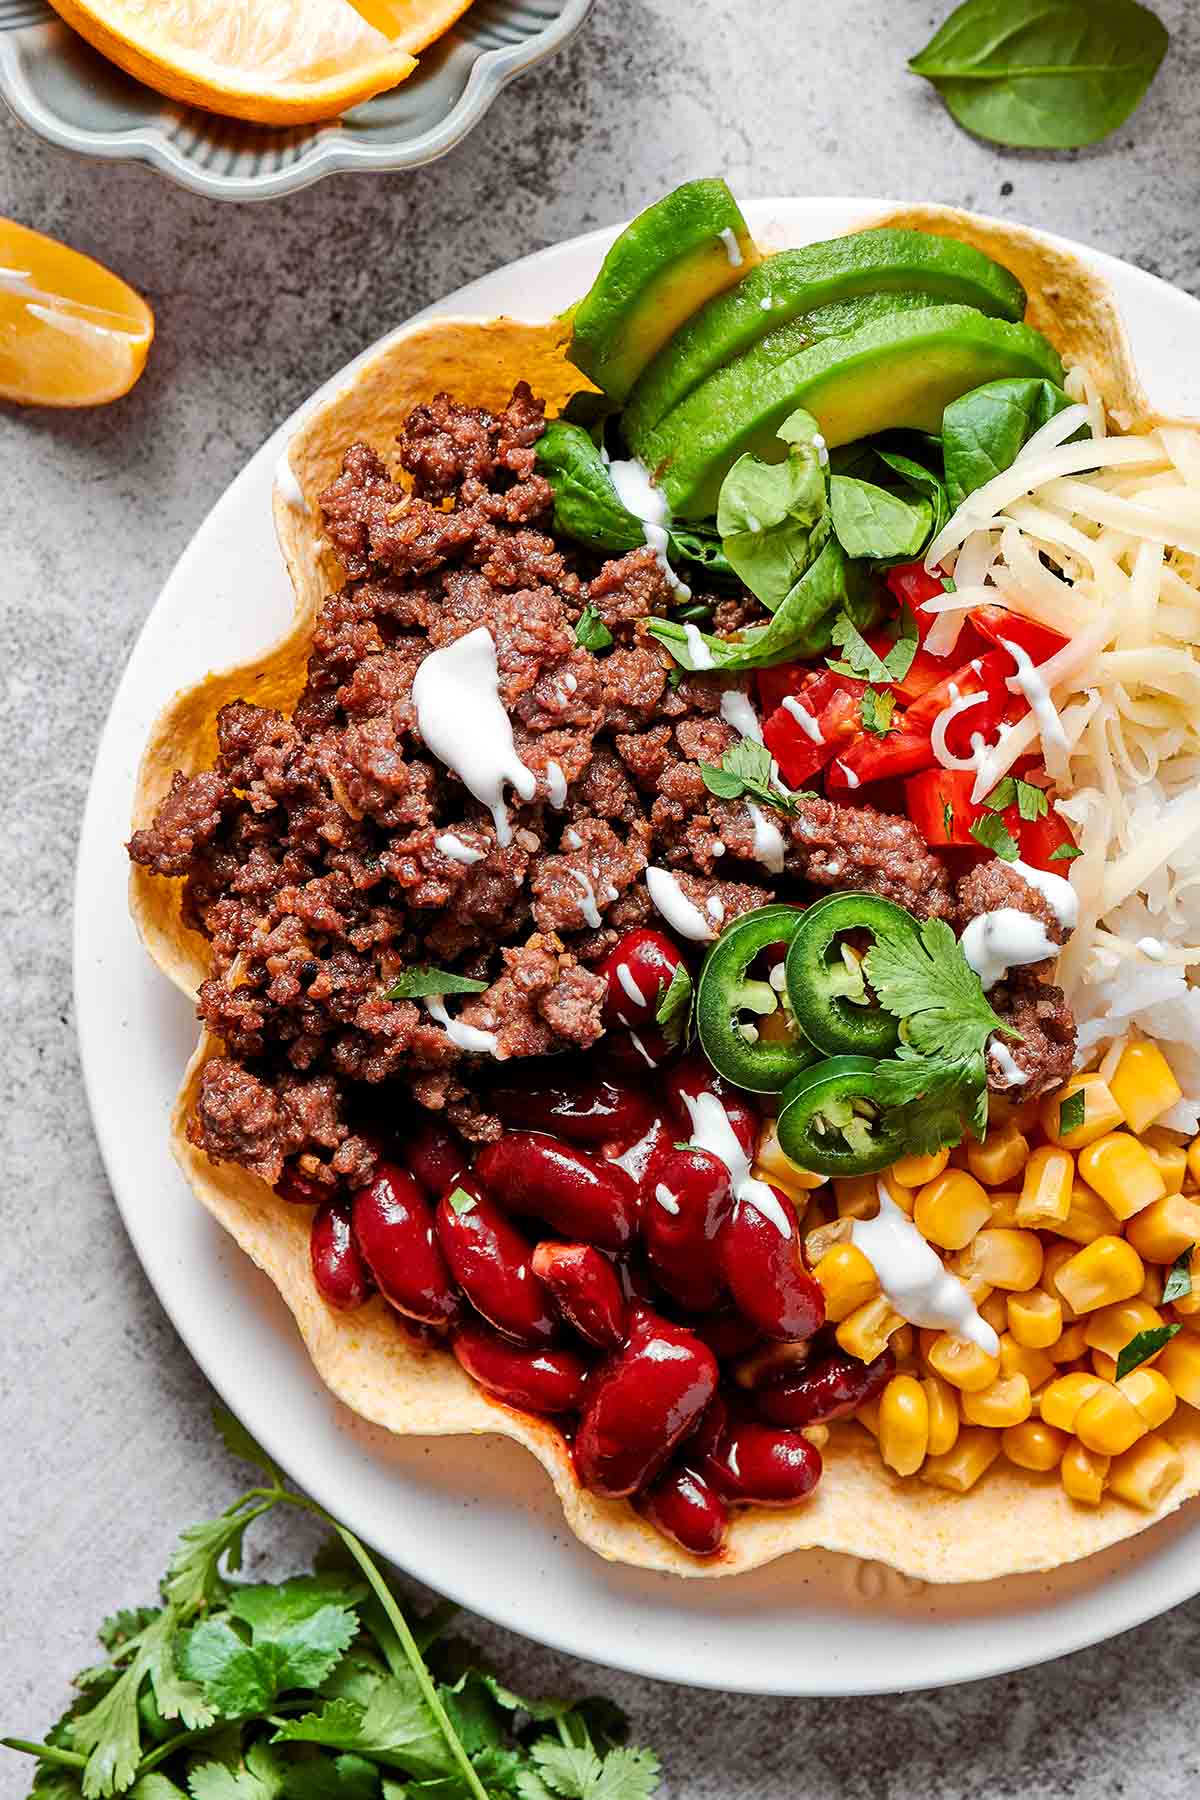 taco bowl filled with kidney beans, corn, avocado, shredded cheese, and sour cream.